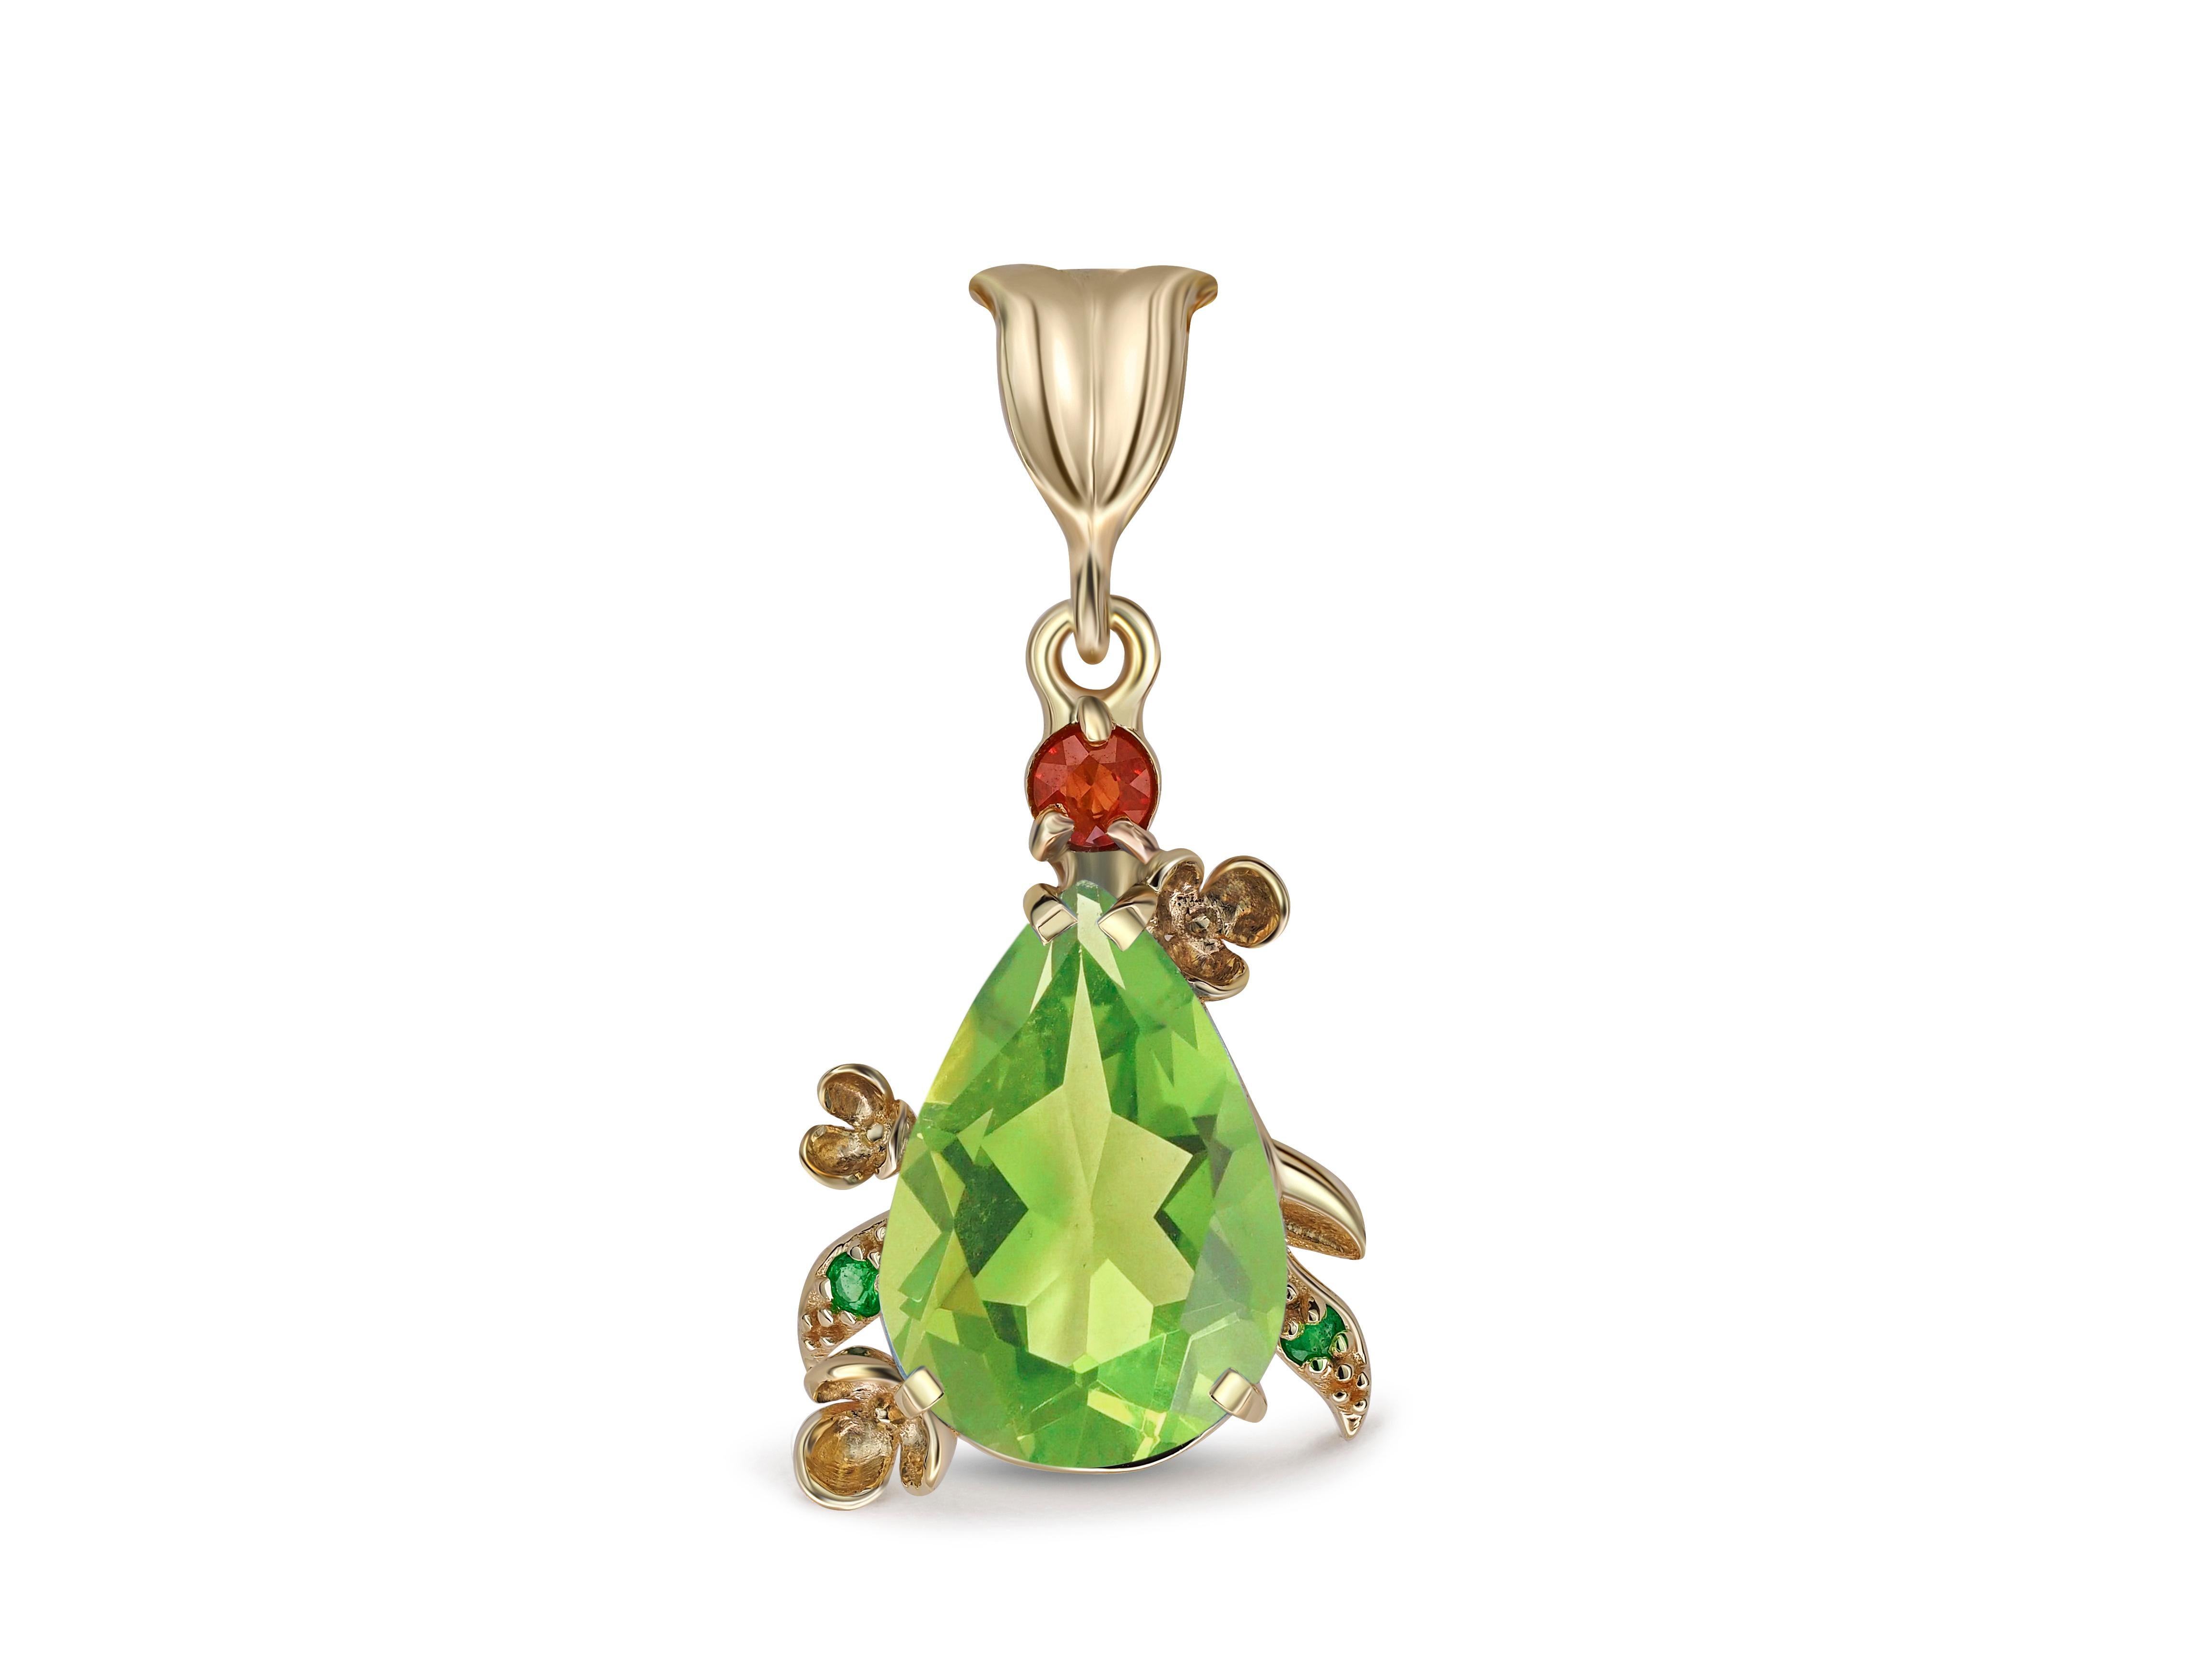 Pear Peridot Pendant in 14 Karat Gold. 
Flower design pendant with natural peridot. Peridot gold pendant. Apple color gemstone pendant.

Metal: 14k gold
Weight: 2.85 g.
Pendant size: 30x14.5 mm.

Set with peridot, 
Color - apple green
Pear cut, 2.5